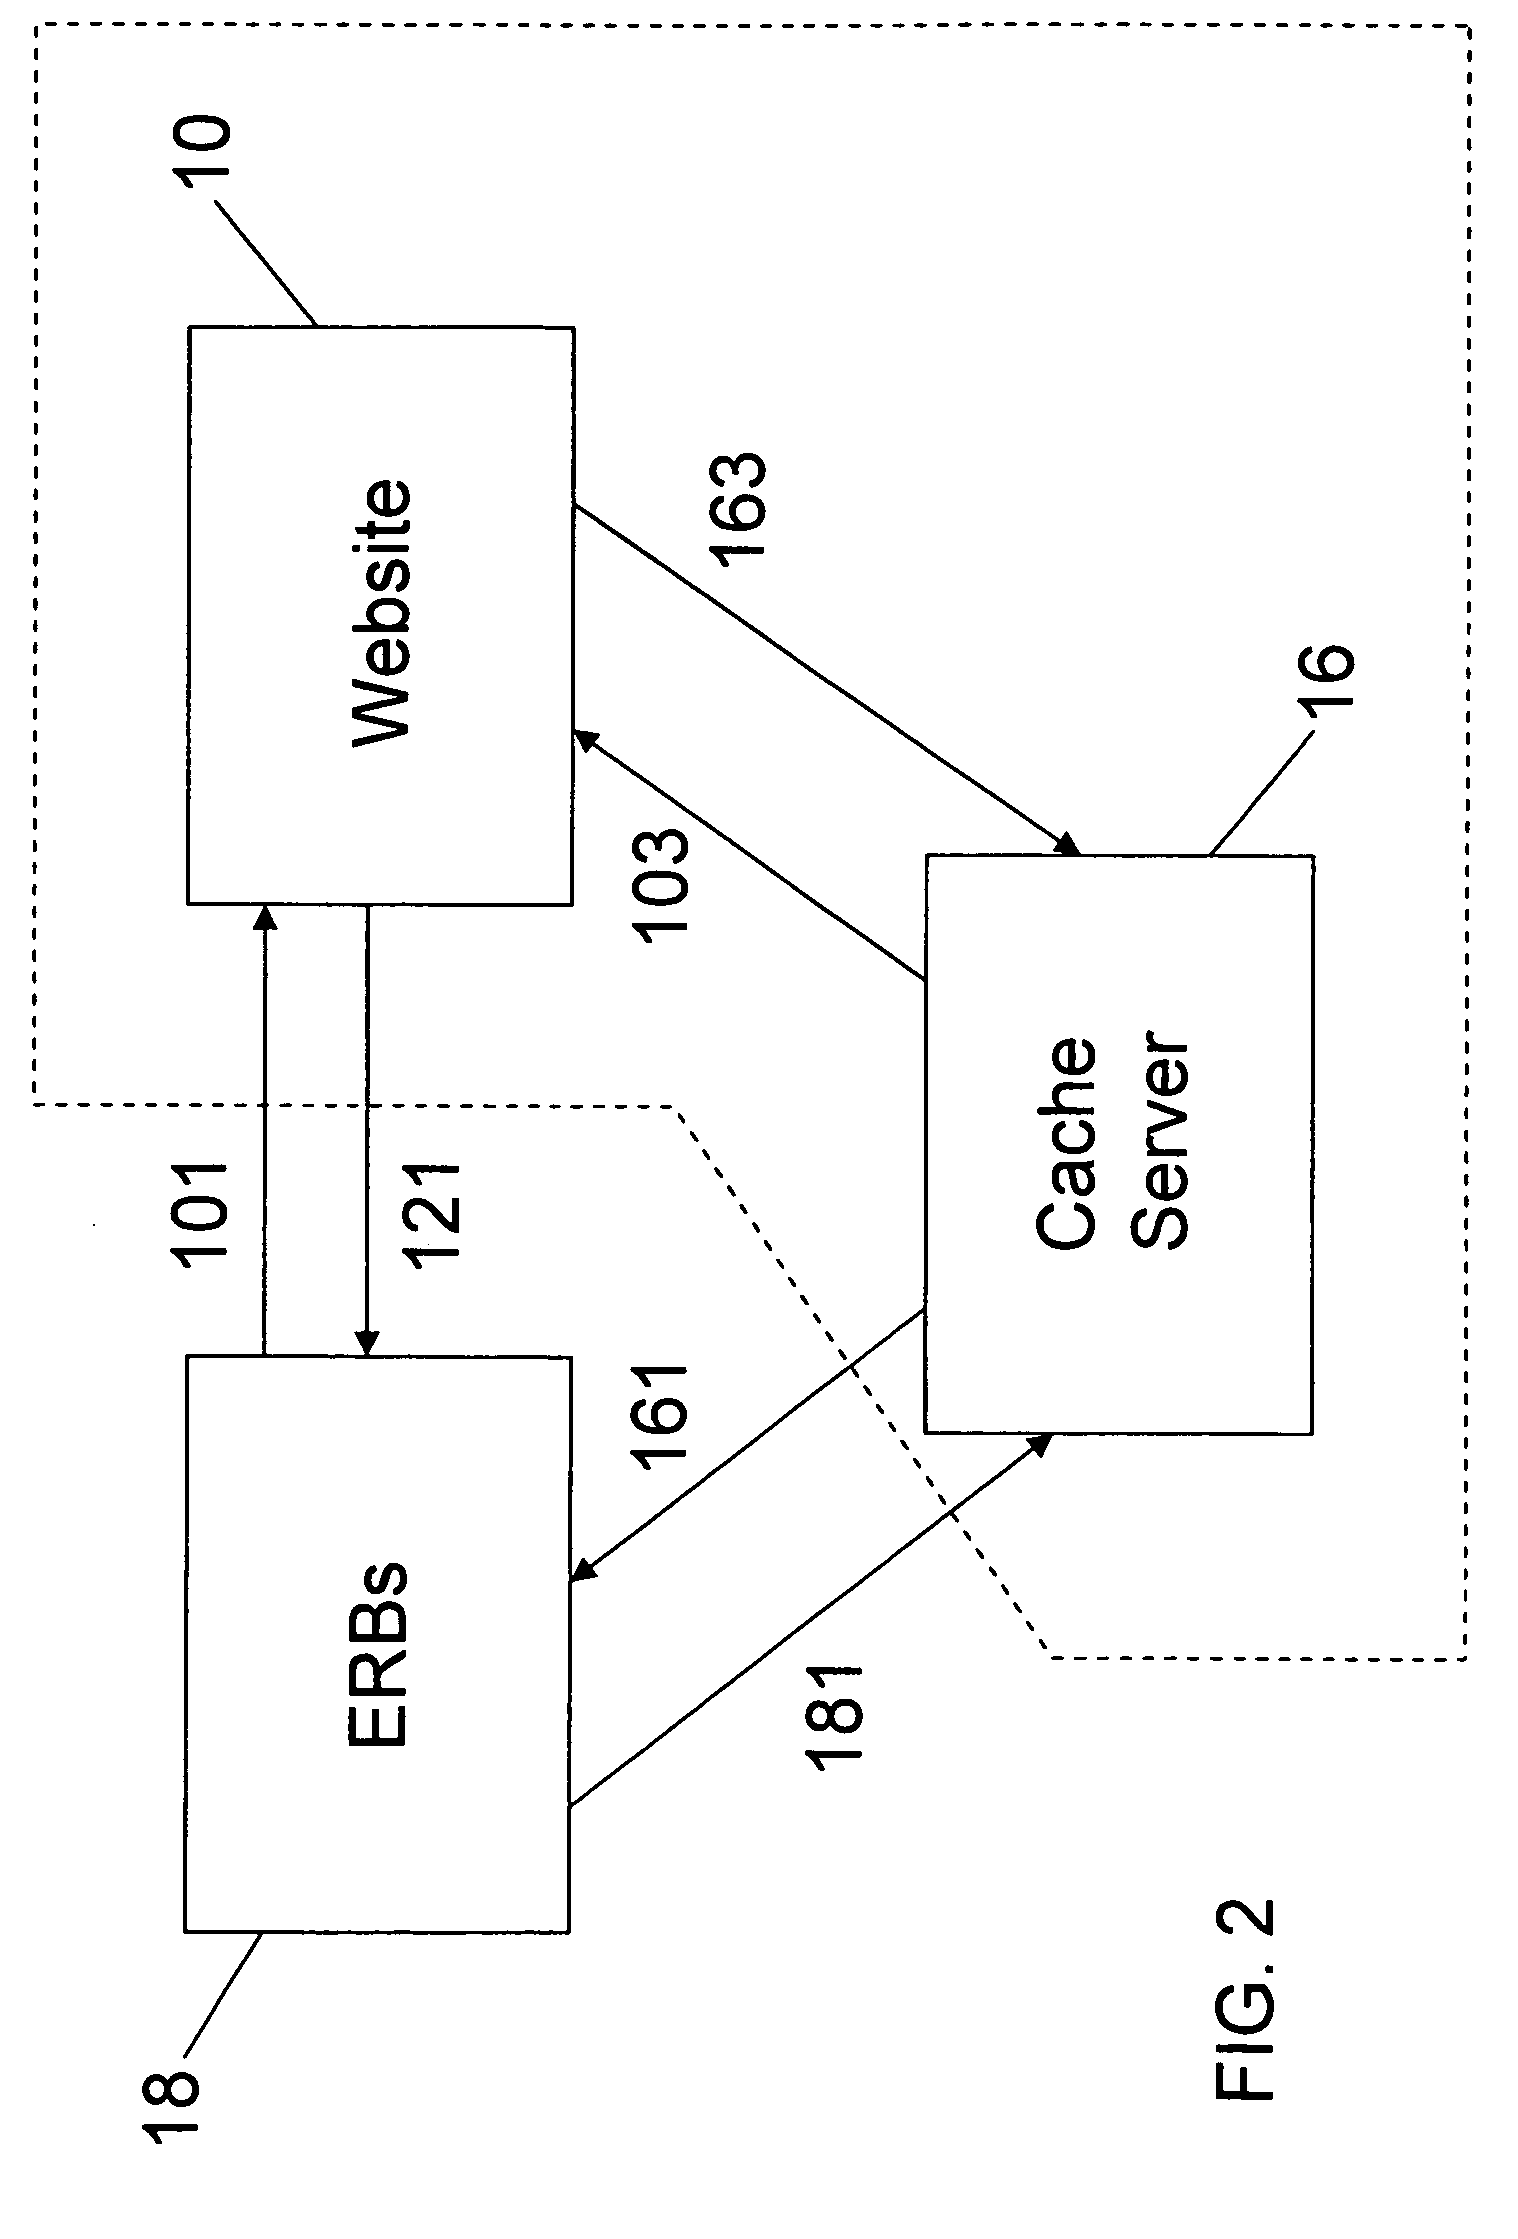 System and method of caching inventory information in a network